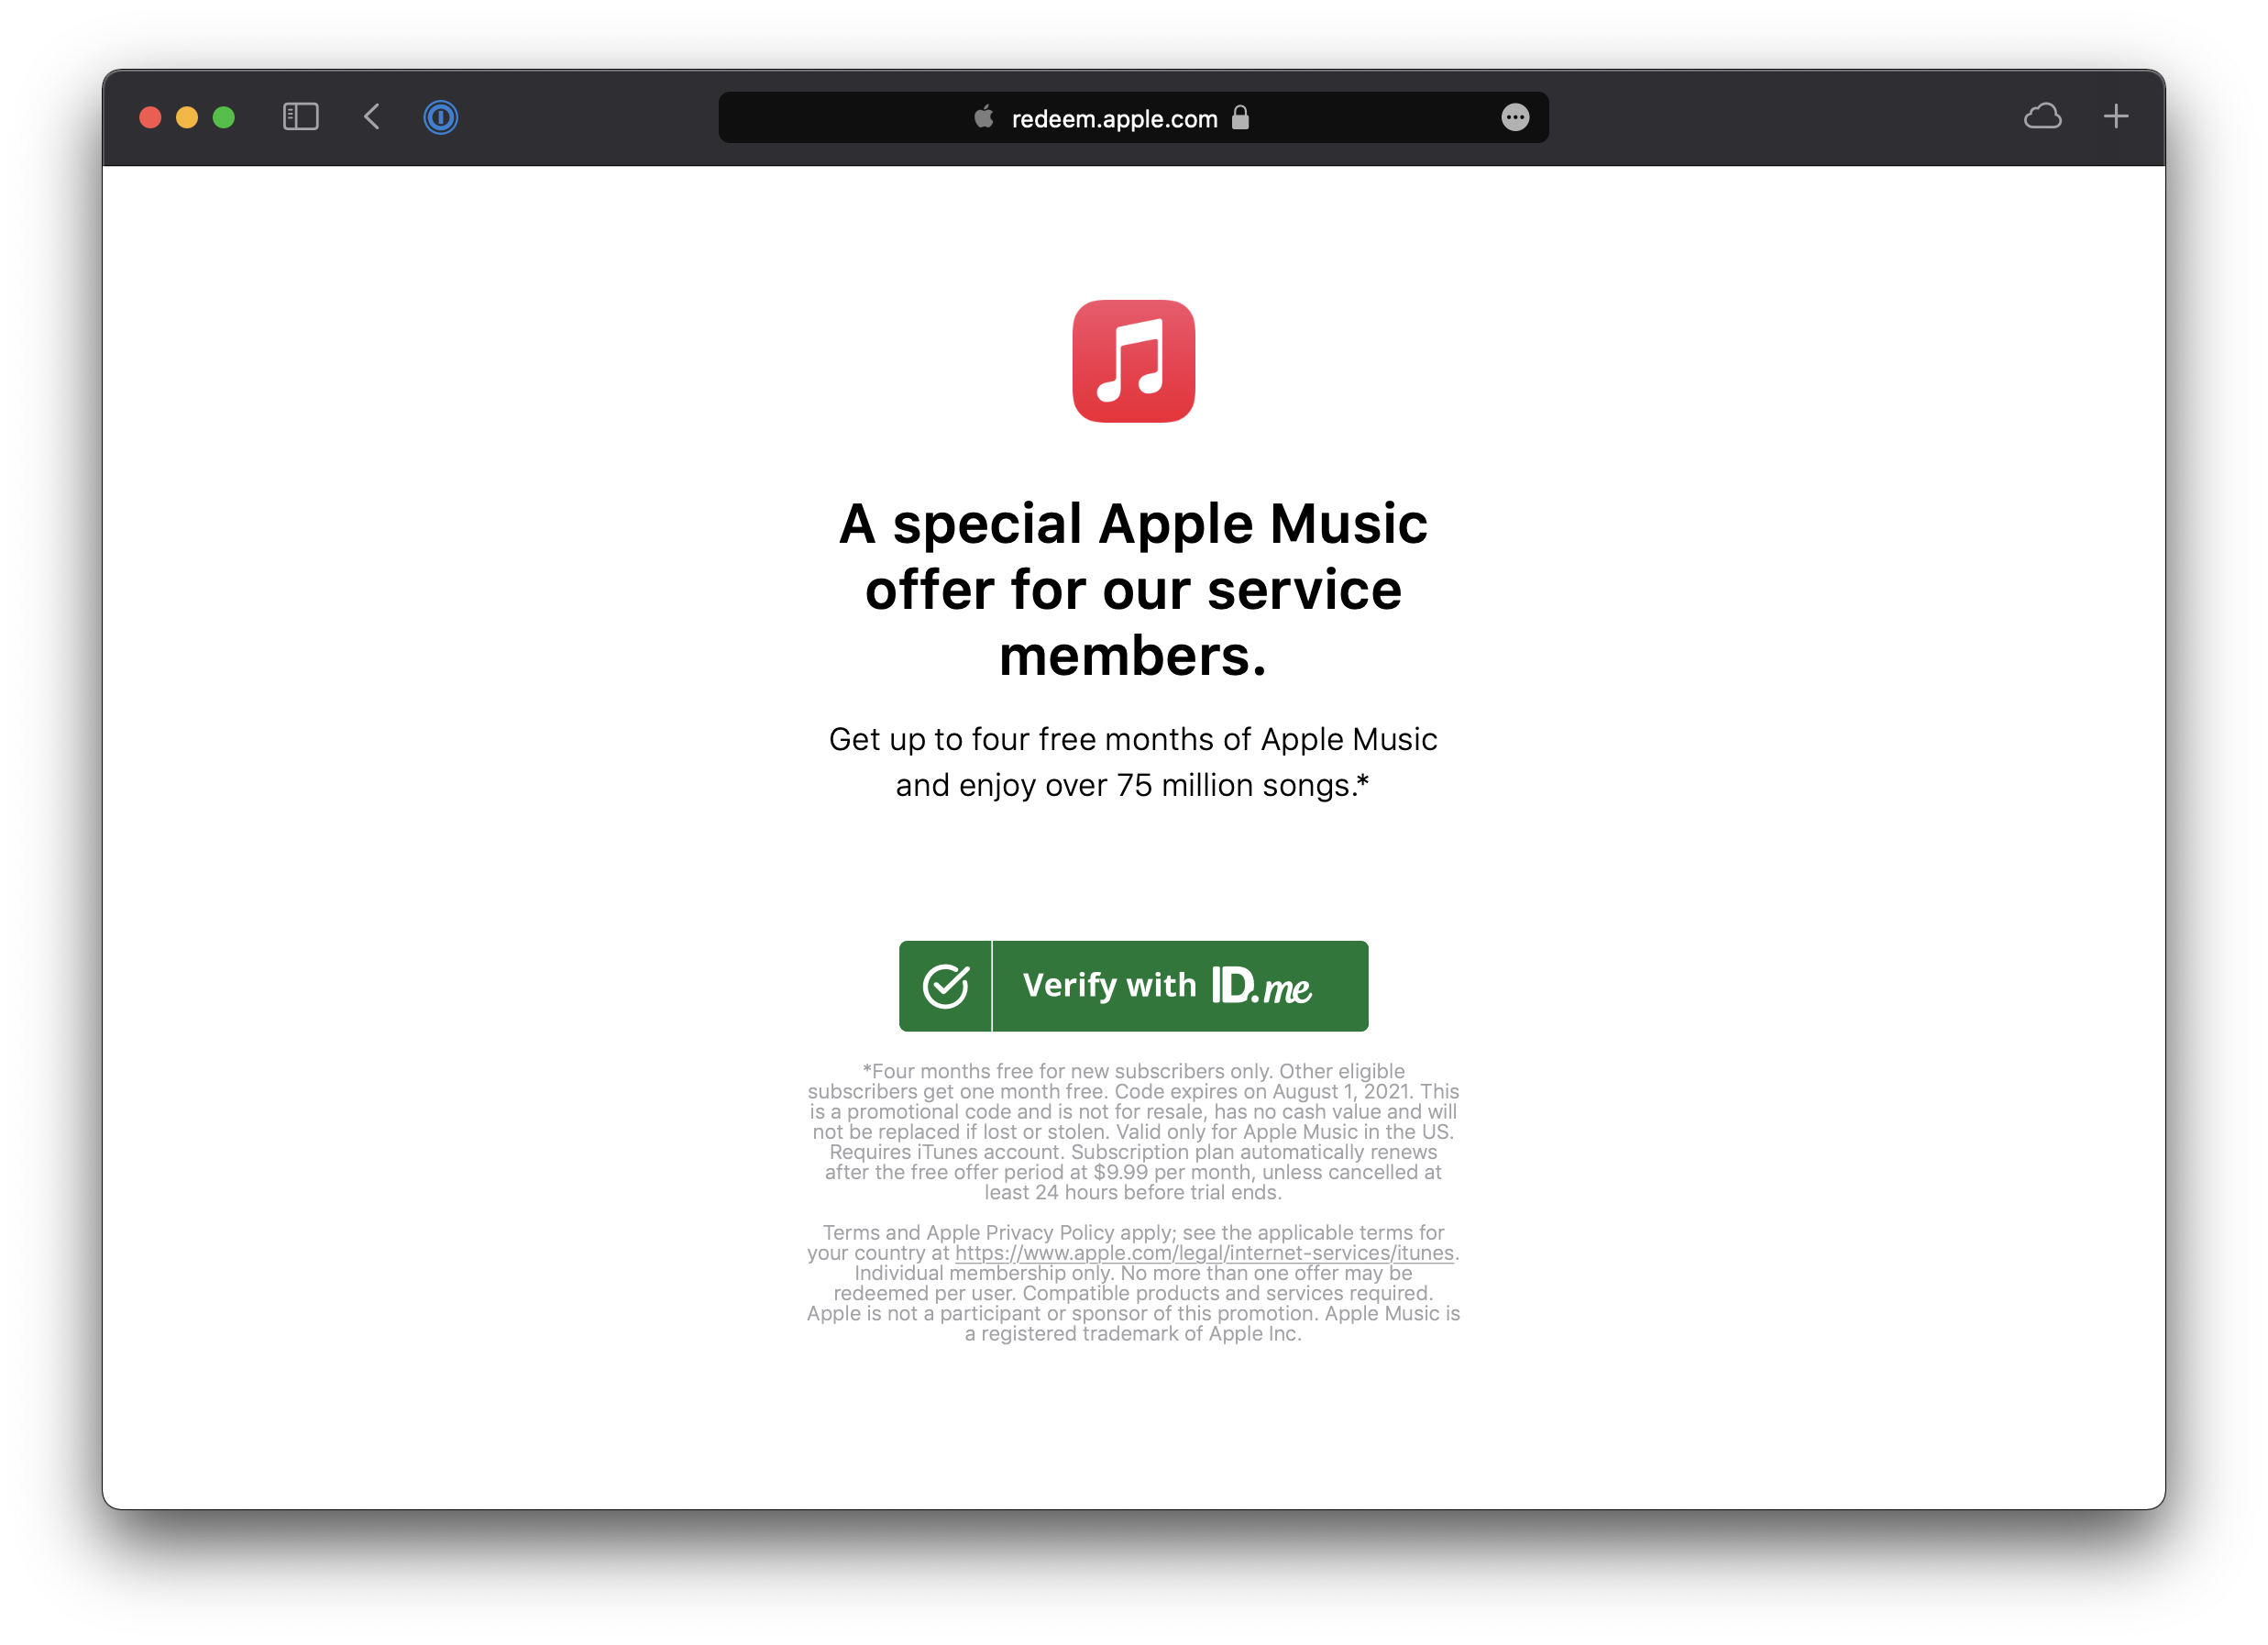 Apple Music offering up to four months free for US military and